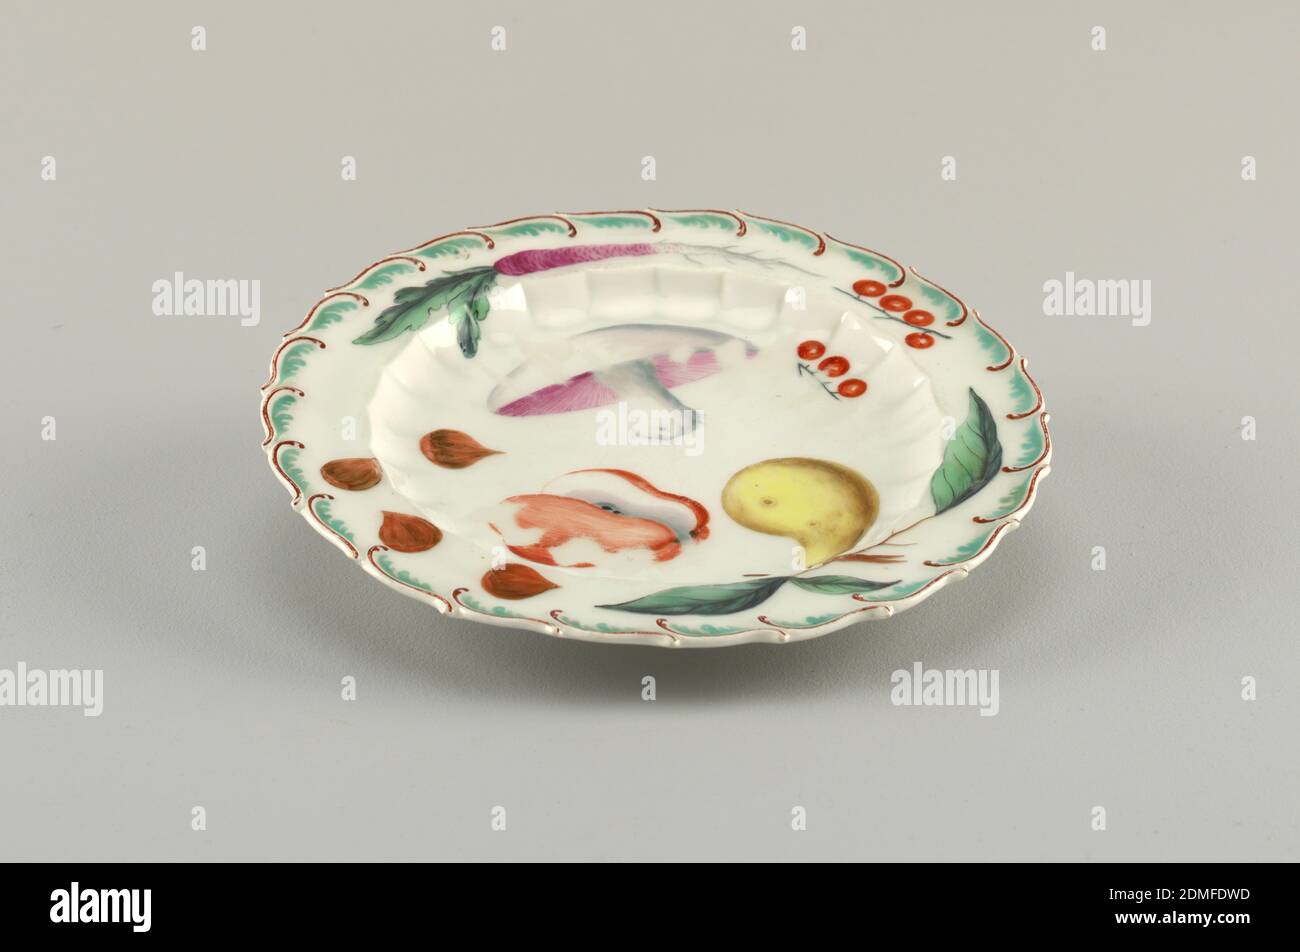 Fruit Plate, Chelsea Porcelain Manufactory, English, established ca. 1743/45, soft paste porcelain, vitreous enamel, Flat marly springing from scalloped inner rim. Raised, feathered edge, painted brown and green. In center, large and small cucumber and an apple. On marly, three rose hips, a purple long radish, currents and small red berries., England, 1753–1758, ceramics, Decorative Arts, plate, plate Stock Photo